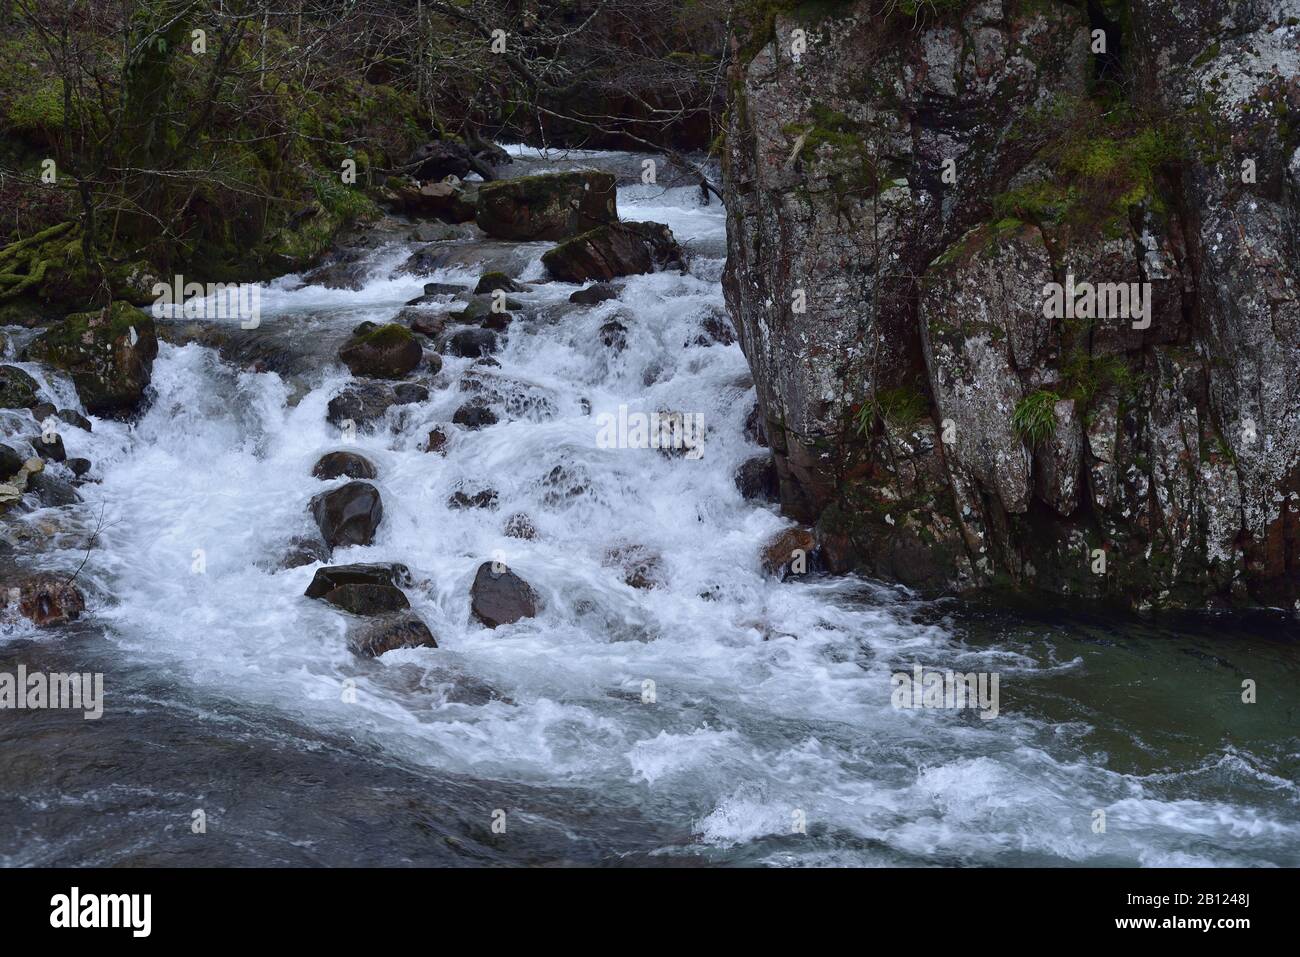 The Lower Falls, Glen Nevis, near Fort William. This is a tributary which joins the main River Nevis at the foot of a low cliff. Stock Photo